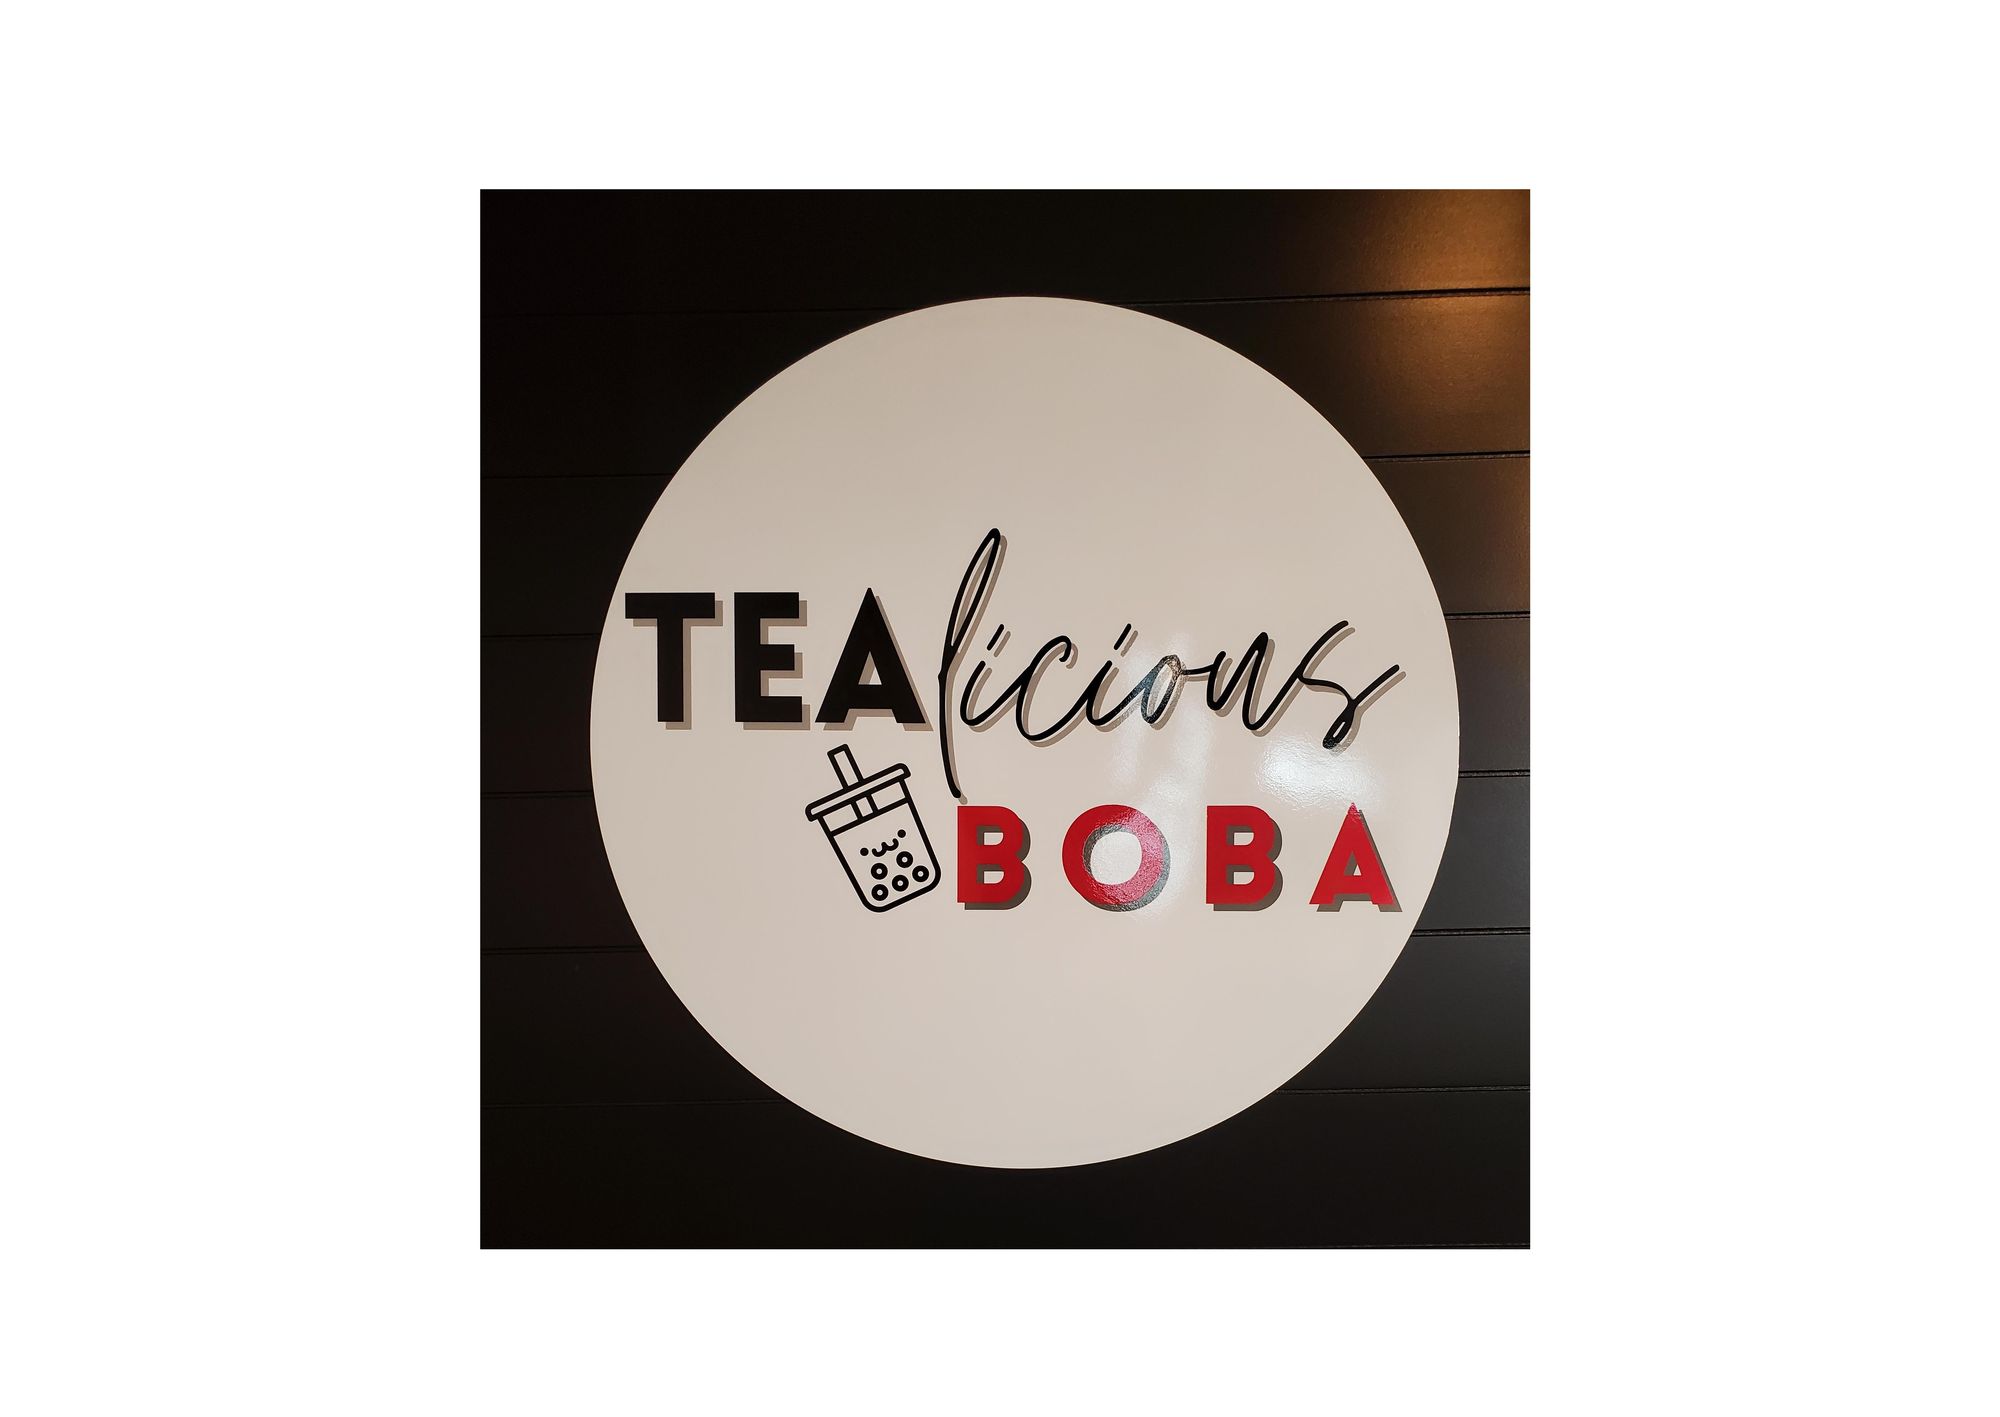 Relaxation and Calmness - Tealicious Boba